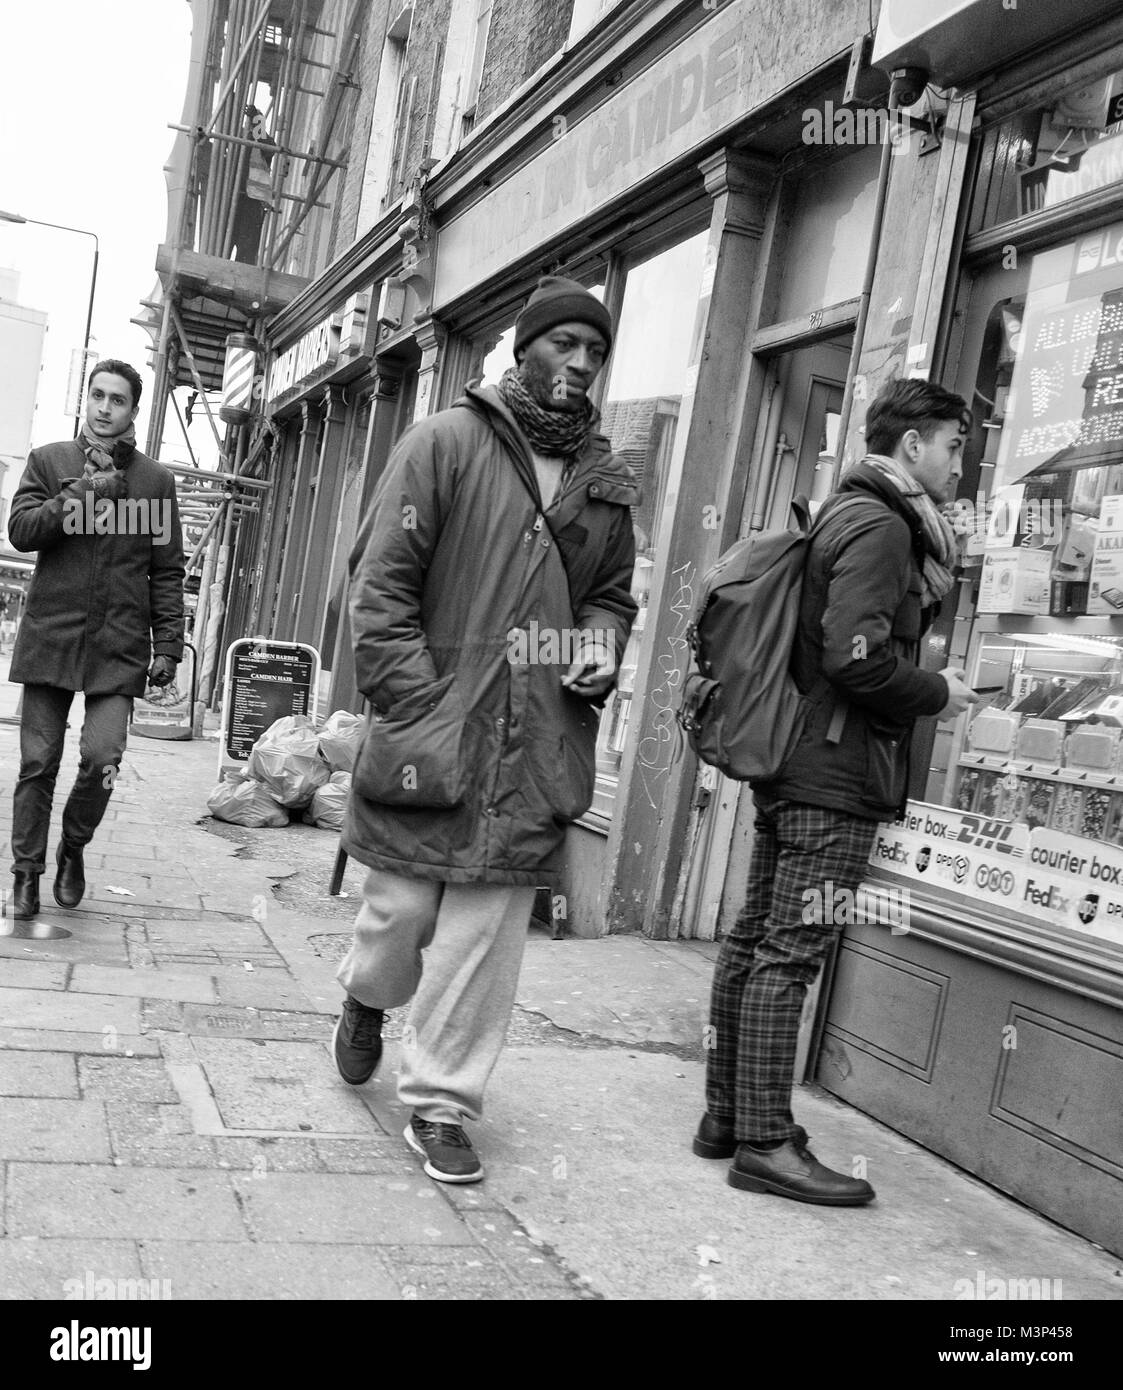 Black & White Photograph of Street Life in Camden, North London, England, UK. Credit: London Snapper Stock Photo